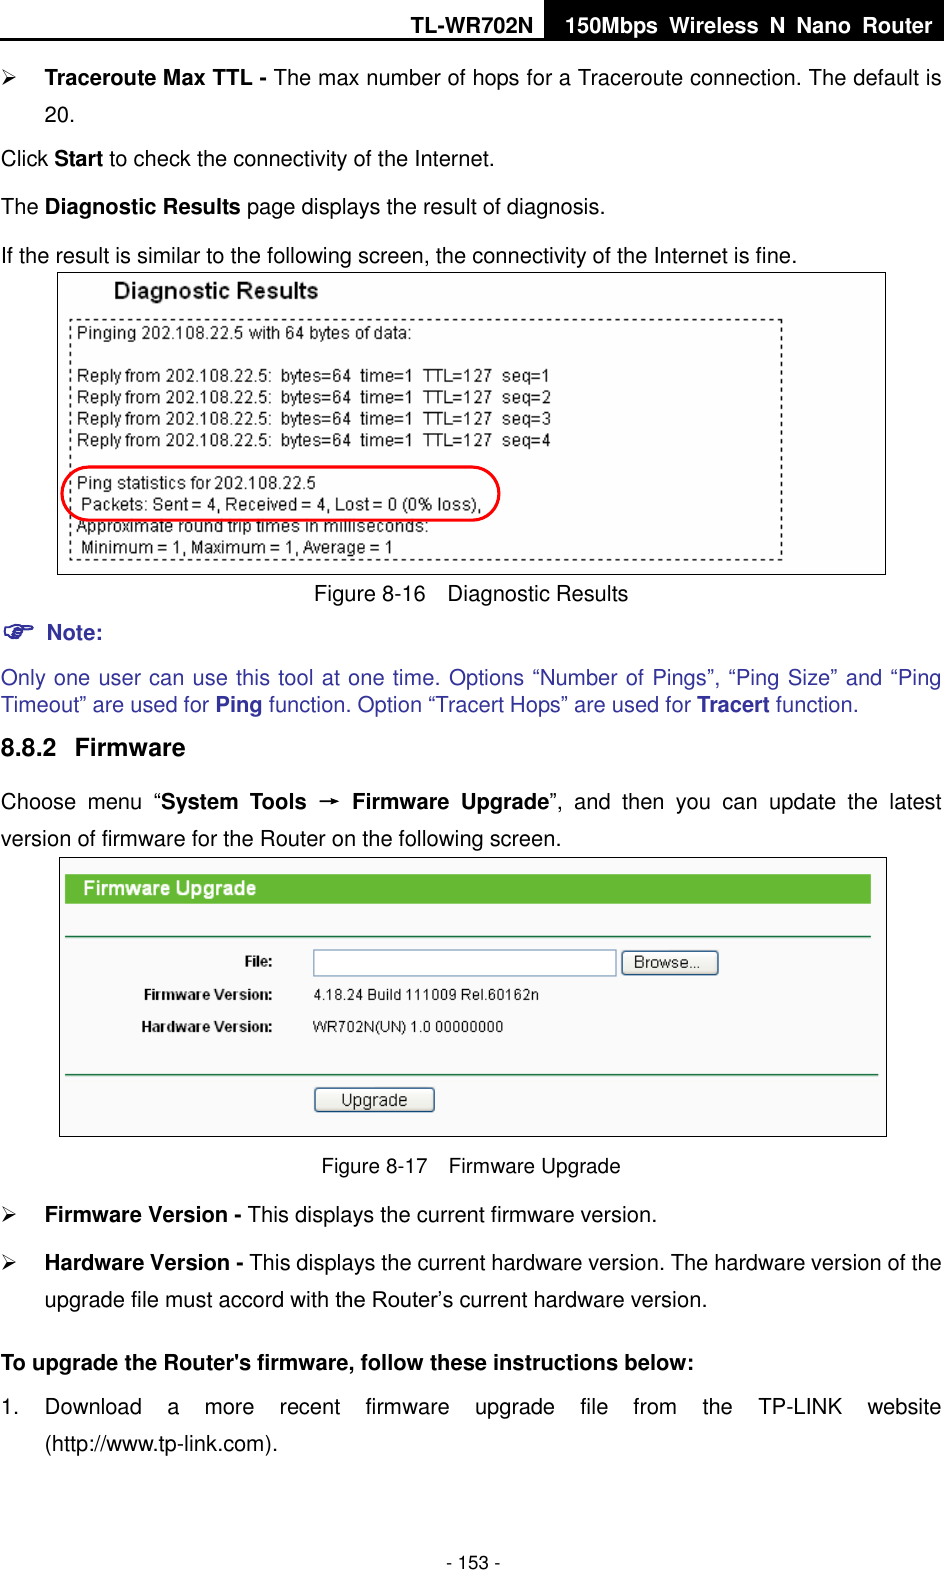 TL-WR702N 150Mbps  Wireless  N  Nano  Router  - 153 -  Traceroute Max TTL - The max number of hops for a Traceroute connection. The default is 20. Click Start to check the connectivity of the Internet.   The Diagnostic Results page displays the result of diagnosis. If the result is similar to the following screen, the connectivity of the Internet is fine.  Figure 8-16  Diagnostic Results  Note: Only one user can use this tool at one time. Options “Number of Pings”, “Ping Size” and “Ping Timeout” are used for Ping function. Option “Tracert Hops” are used for Tracert function. 8.8.2  Firmware Choose  menu  “System  Tools  →  Firmware  Upgrade”,  and  then  you  can  update  the  latest version of firmware for the Router on the following screen.  Figure 8-17  Firmware Upgrade  Firmware Version - This displays the current firmware version.  Hardware Version - This displays the current hardware version. The hardware version of the upgrade file must accord with the Router’s current hardware version. To upgrade the Router&apos;s firmware, follow these instructions below: 1.  Download  a  more  recent  firmware  upgrade  file  from  the  TP-LINK  website (http://www.tp-link.com).   